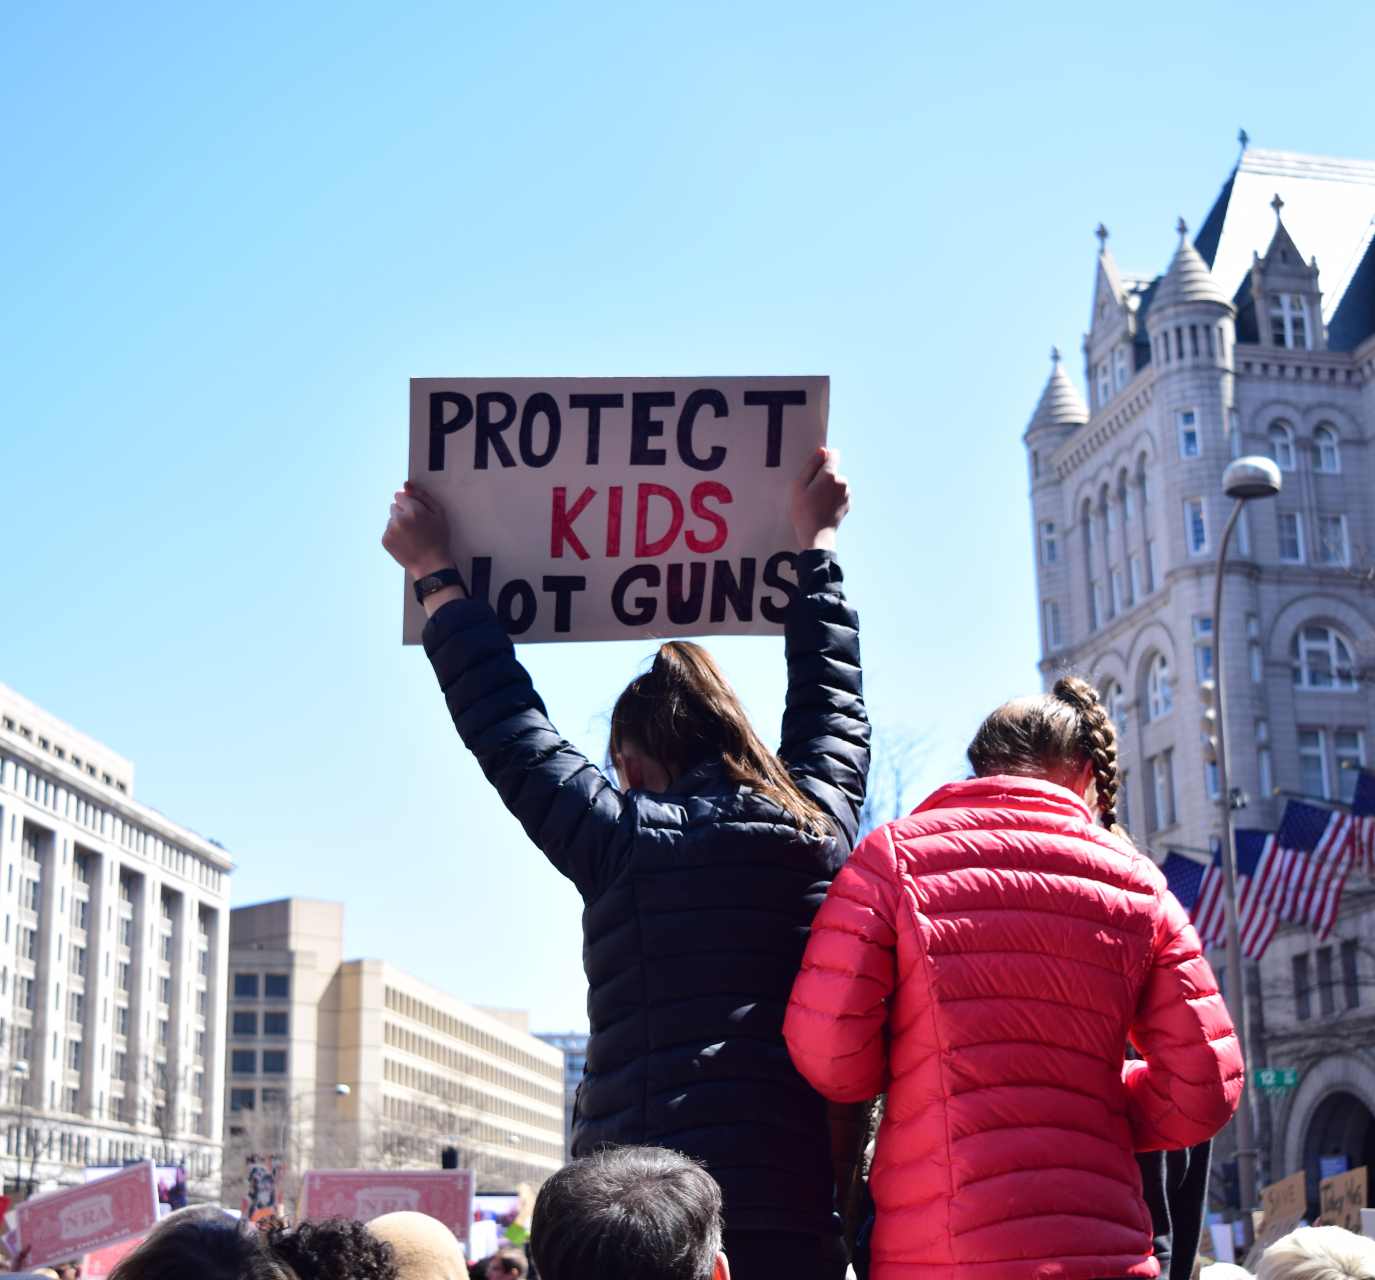 Photo of a woman holding up a "Protect kids not guns" sign at a protest.